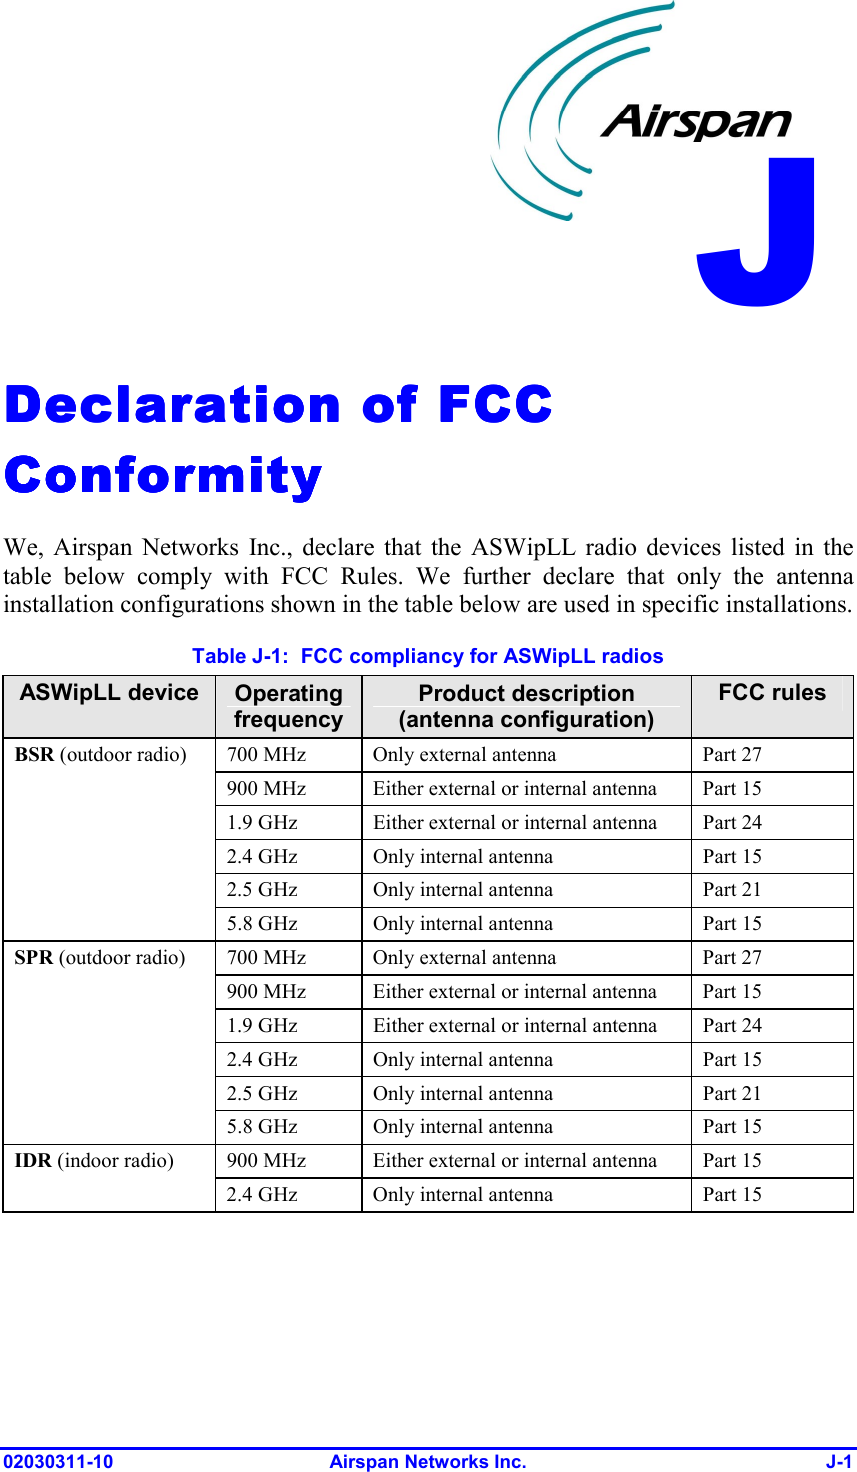  02030311-10 Airspan Networks Inc.  J-1 Declaration of Declaration of Declaration of Declaration of FCC FCC FCC FCC ConformityConformityConformityConformity    We, Airspan Networks Inc., declare that the ASWipLL radio devices listed in the table below comply with FCC Rules. We further declare that only the antenna installation configurations shown in the table below are used in specific installations. Table  J-1:  FCC compliancy for ASWipLL radios ASWipLL device  Operating frequency Product description (antenna configuration) FCC rules 700 MHz  Only external antenna  Part 27 900 MHz  Either external or internal antenna  Part 15 1.9 GHz  Either external or internal antenna  Part 24 2.4 GHz  Only internal antenna  Part 15 2.5 GHz  Only internal antenna  Part 21 BSR (outdoor radio) 5.8 GHz  Only internal antenna  Part 15 700 MHz  Only external antenna  Part 27 900 MHz  Either external or internal antenna  Part 15 1.9 GHz  Either external or internal antenna  Part 24 2.4 GHz  Only internal antenna  Part 15 2.5 GHz  Only internal antenna  Part 21 SPR (outdoor radio) 5.8 GHz  Only internal antenna  Part 15 900 MHz  Either external or internal antenna  Part 15 IDR (indoor radio) 2.4 GHz  Only internal antenna  Part 15  J 